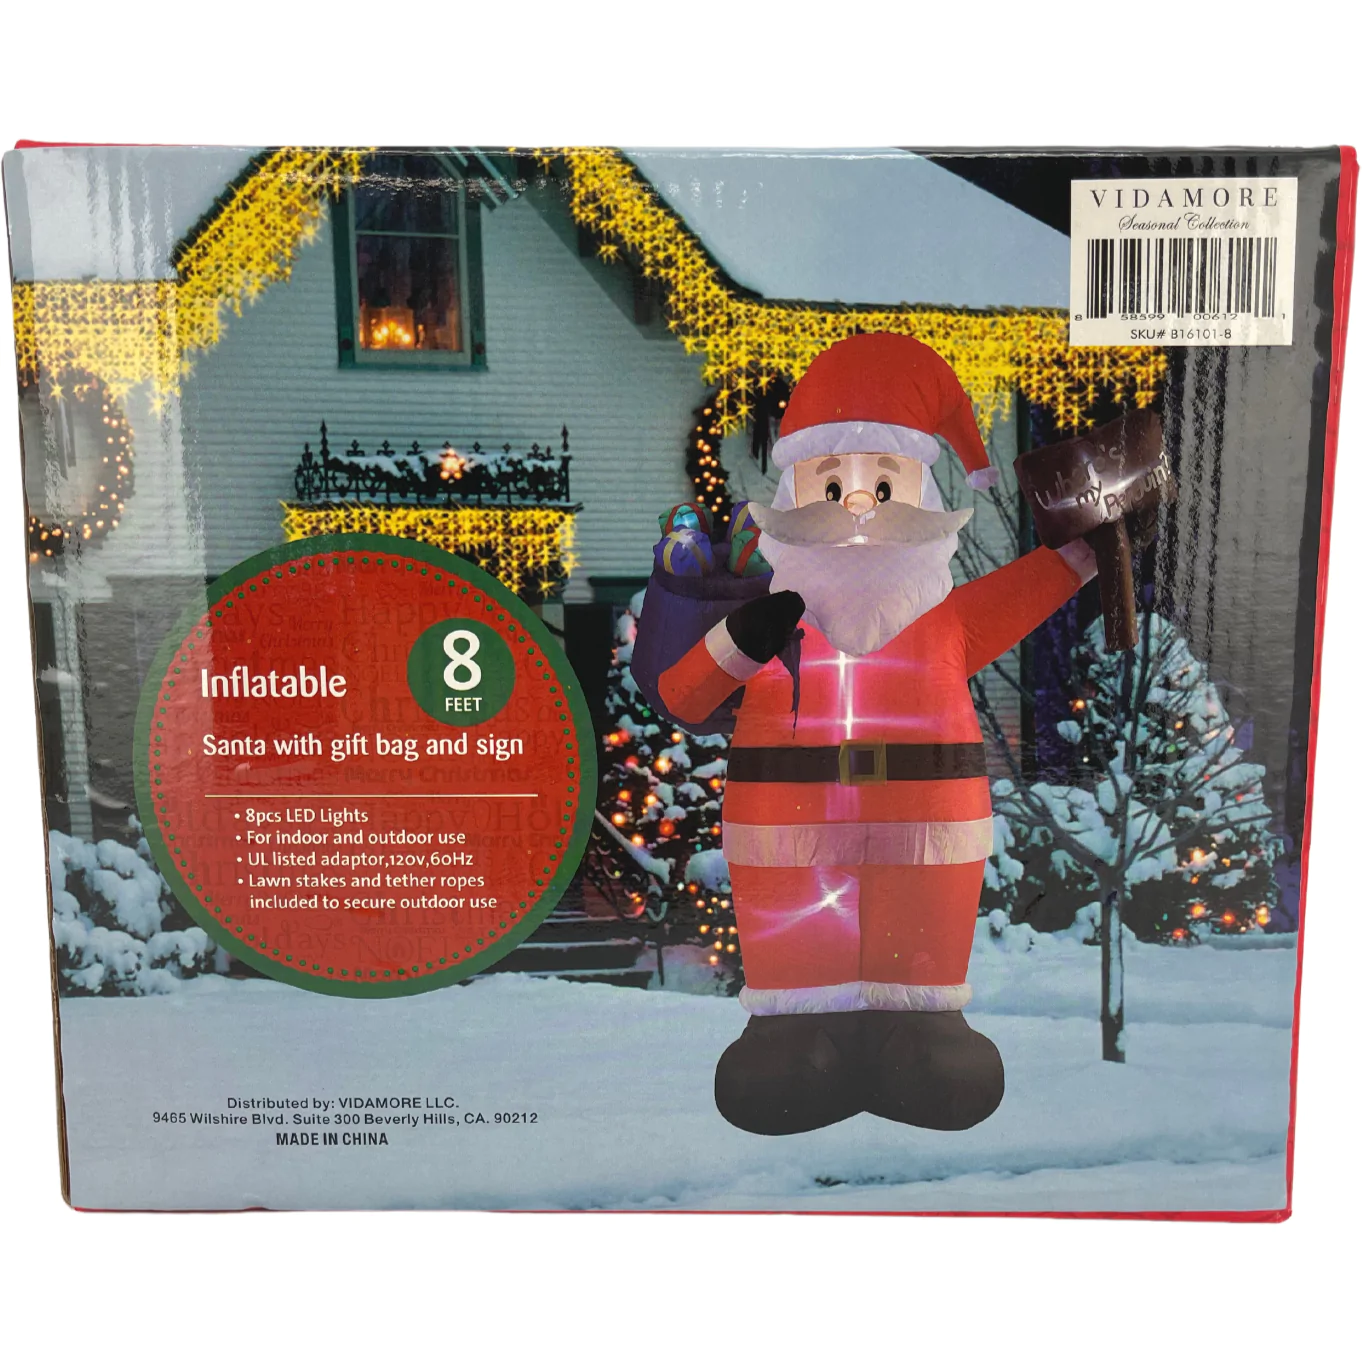 Vidamore Inflatable Santa Claus / 8ft Santa with Gifts & Sign / Outdoor Christmas Decoration